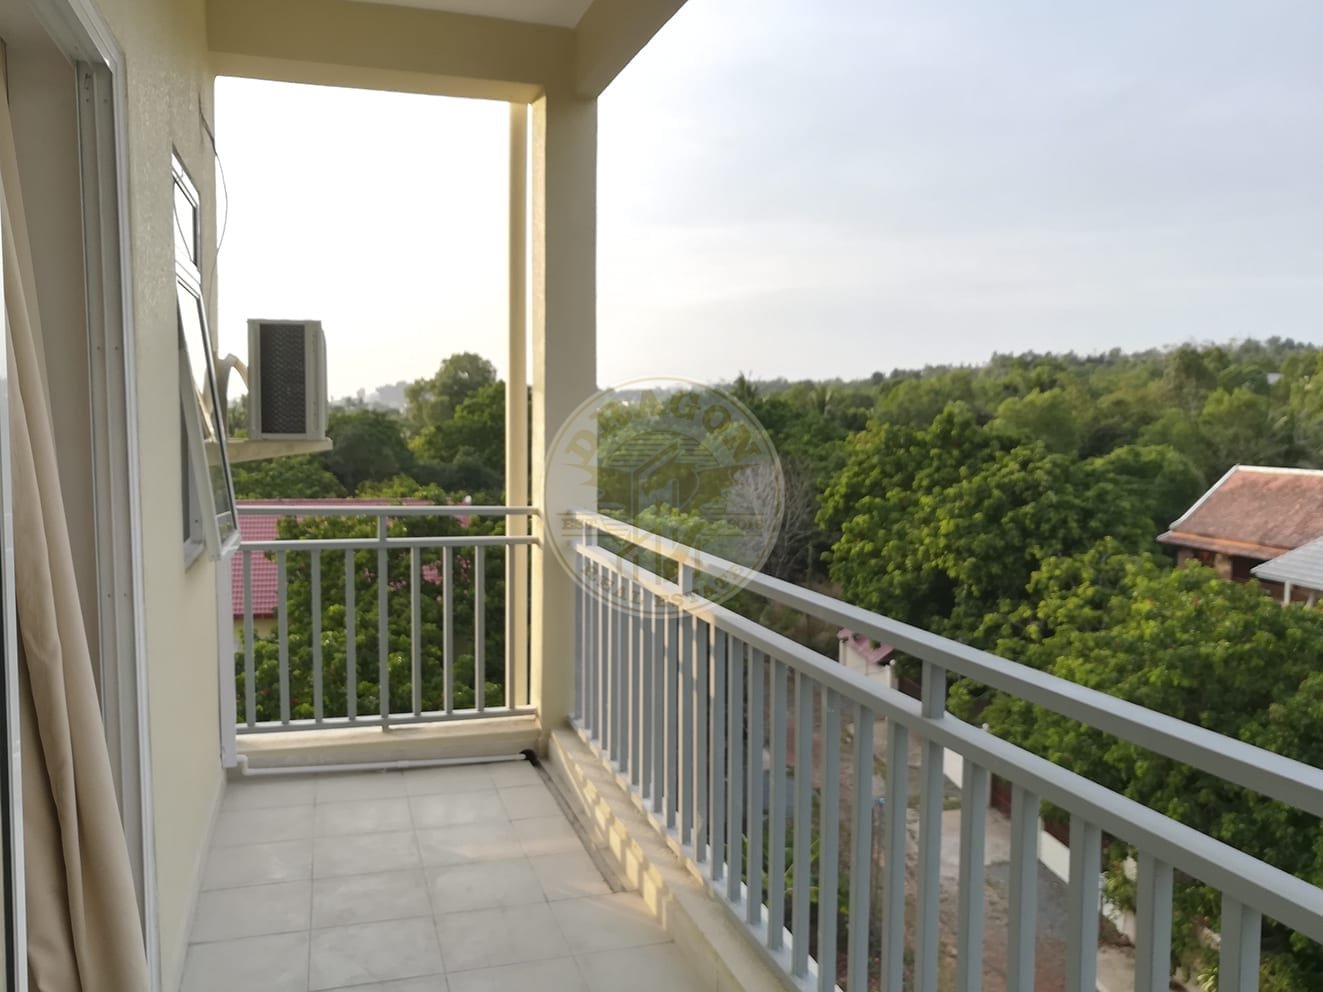 Apartment w/ One balcony for Rent. Sihanoukville Monthly Rental